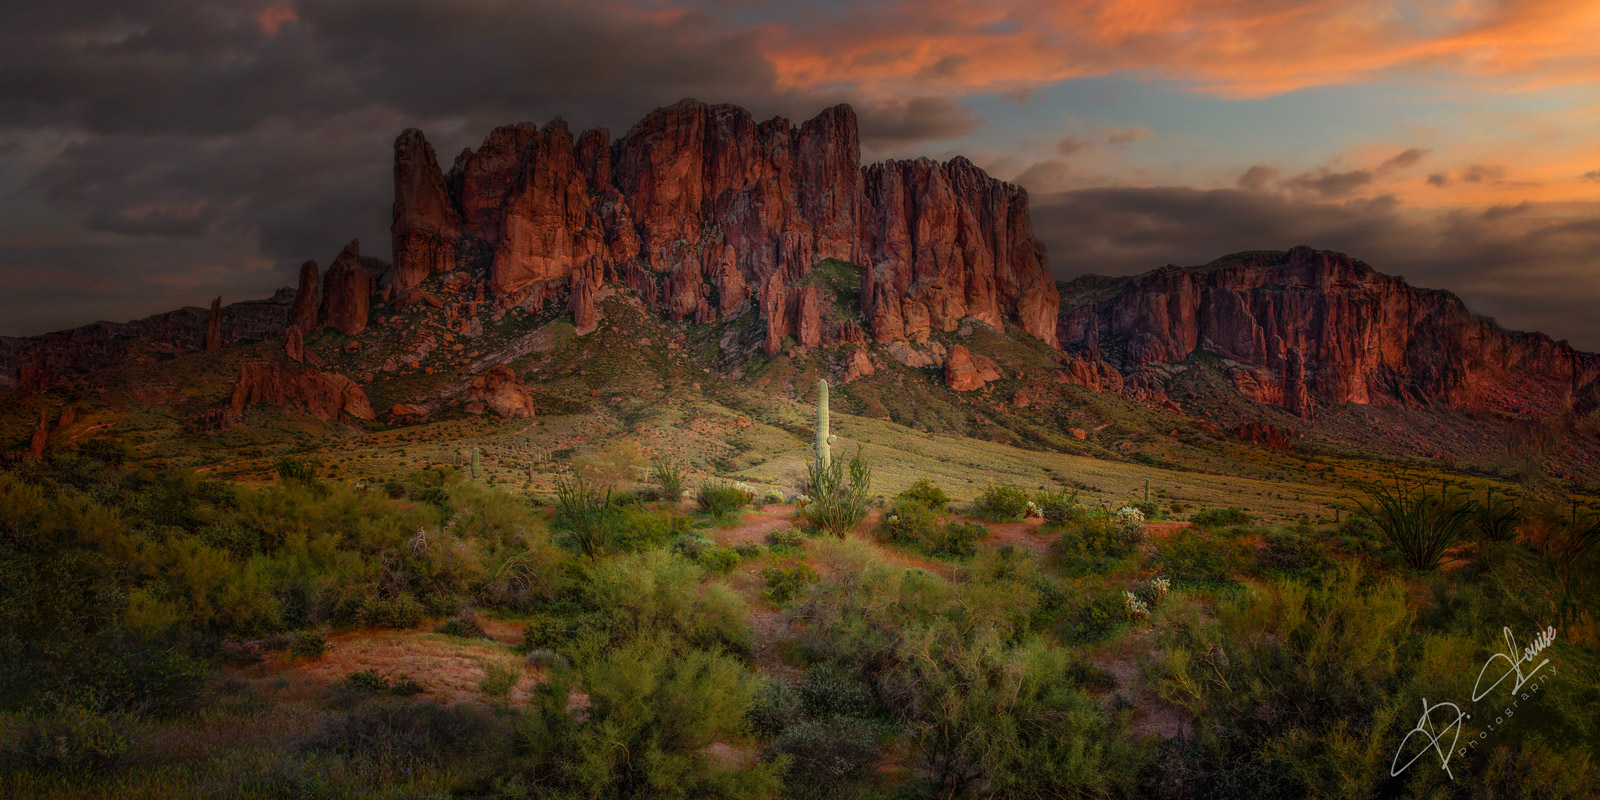 The Superstition Mountains stand stoic at twilight